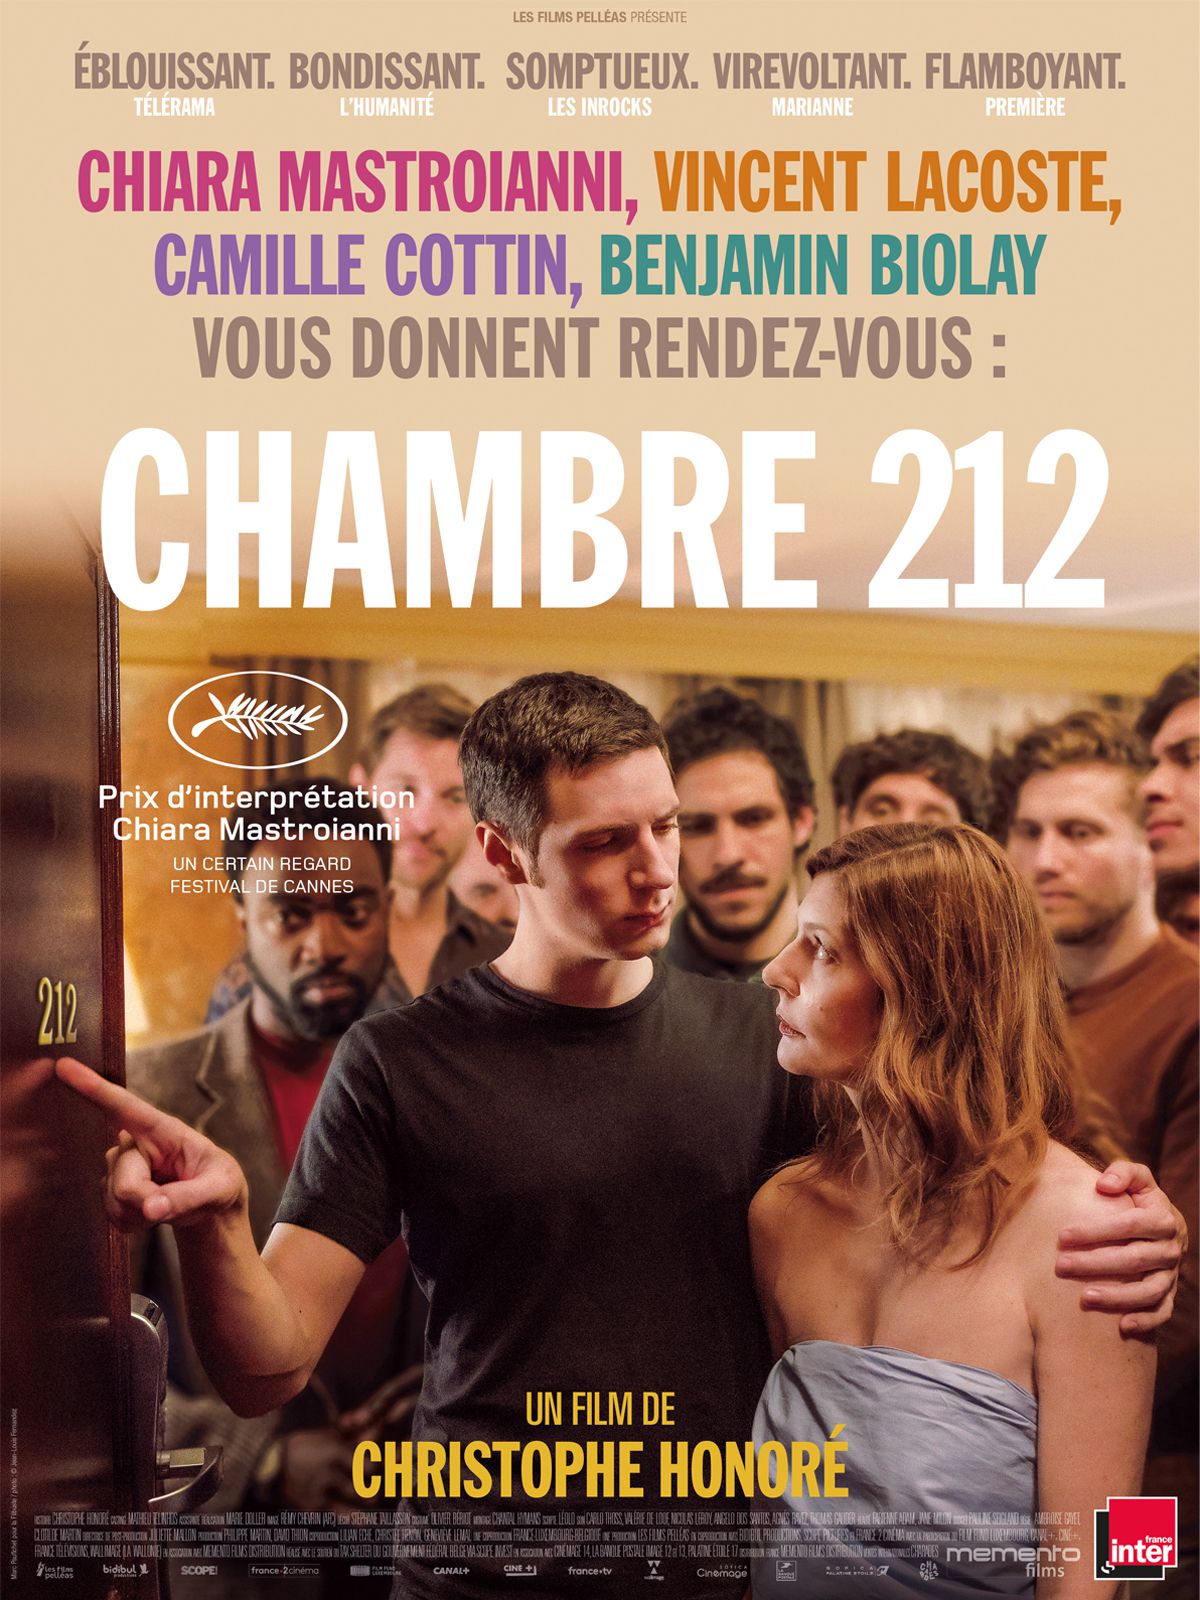 Chambre 212 - Film (2019) streaming VF gratuit complet